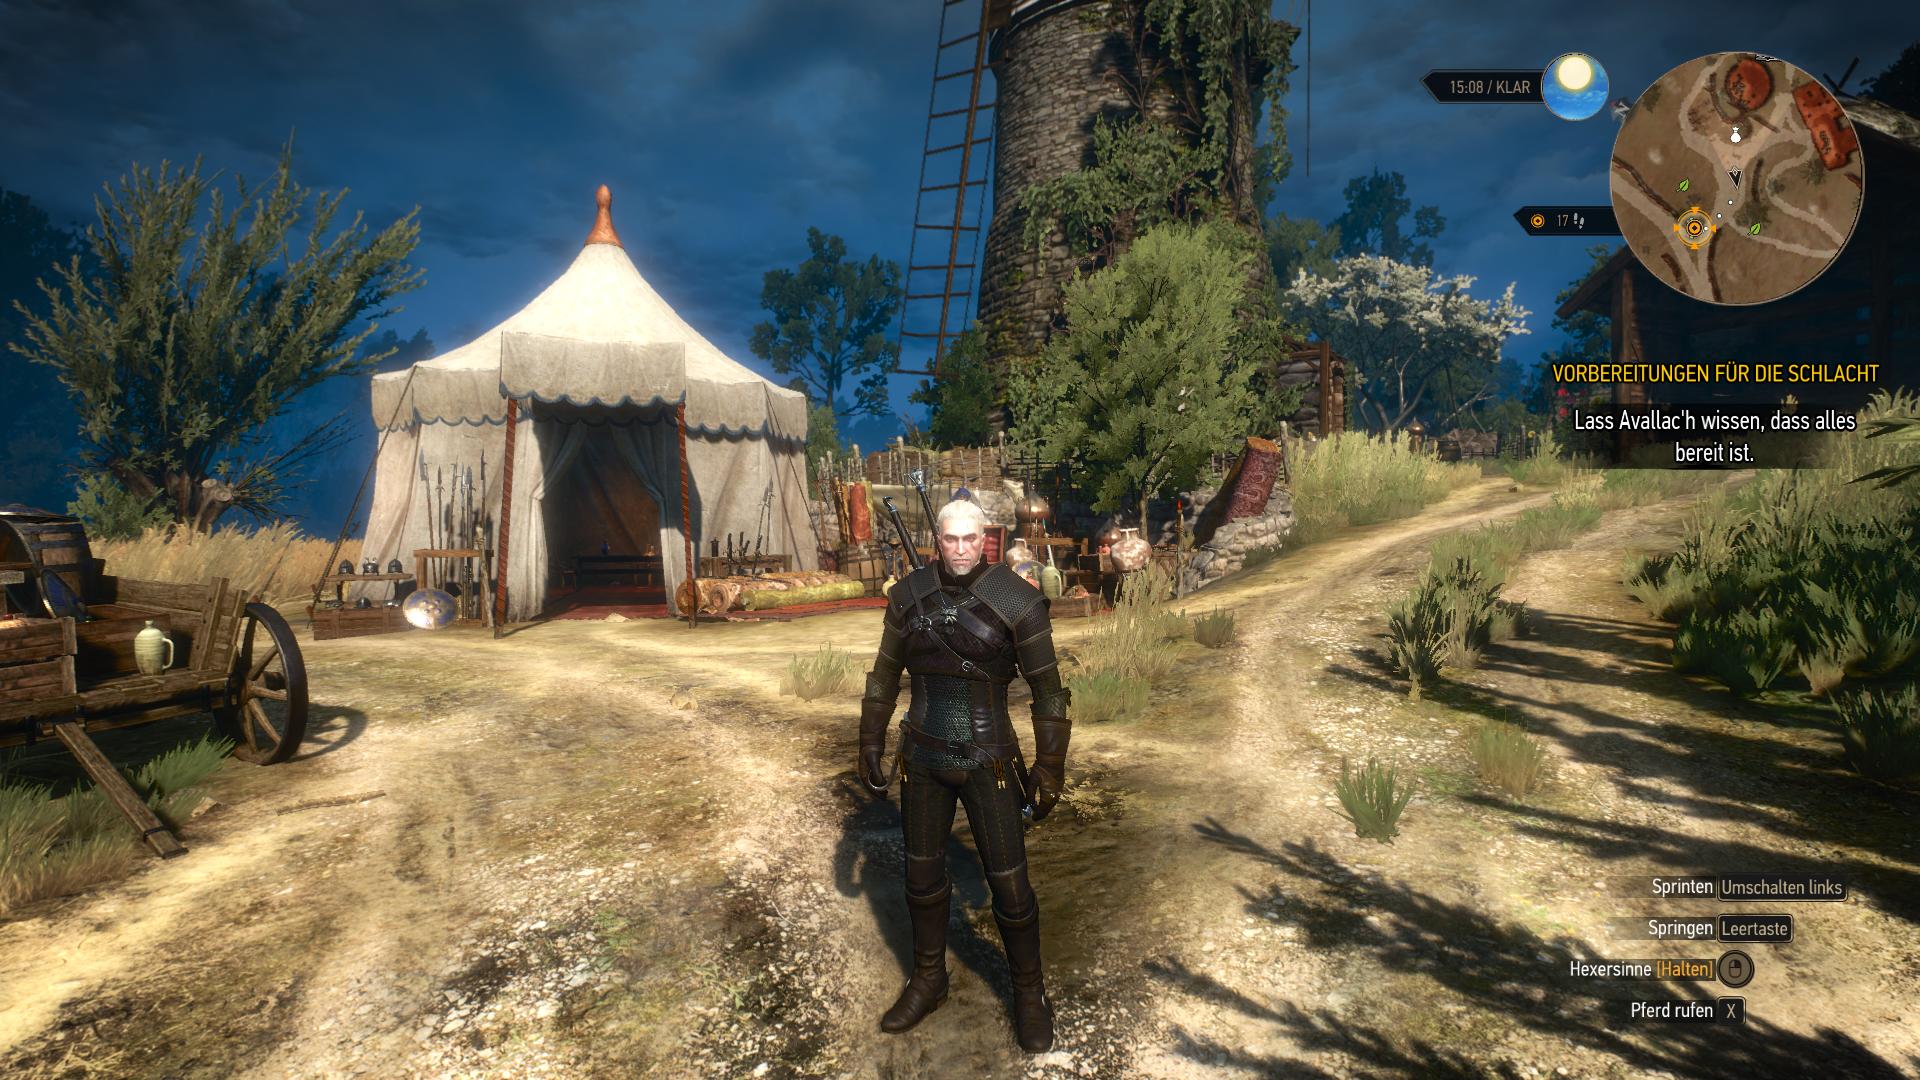 hearts-of-stone-ausr-stungssets-the-witcher-3-rpguides